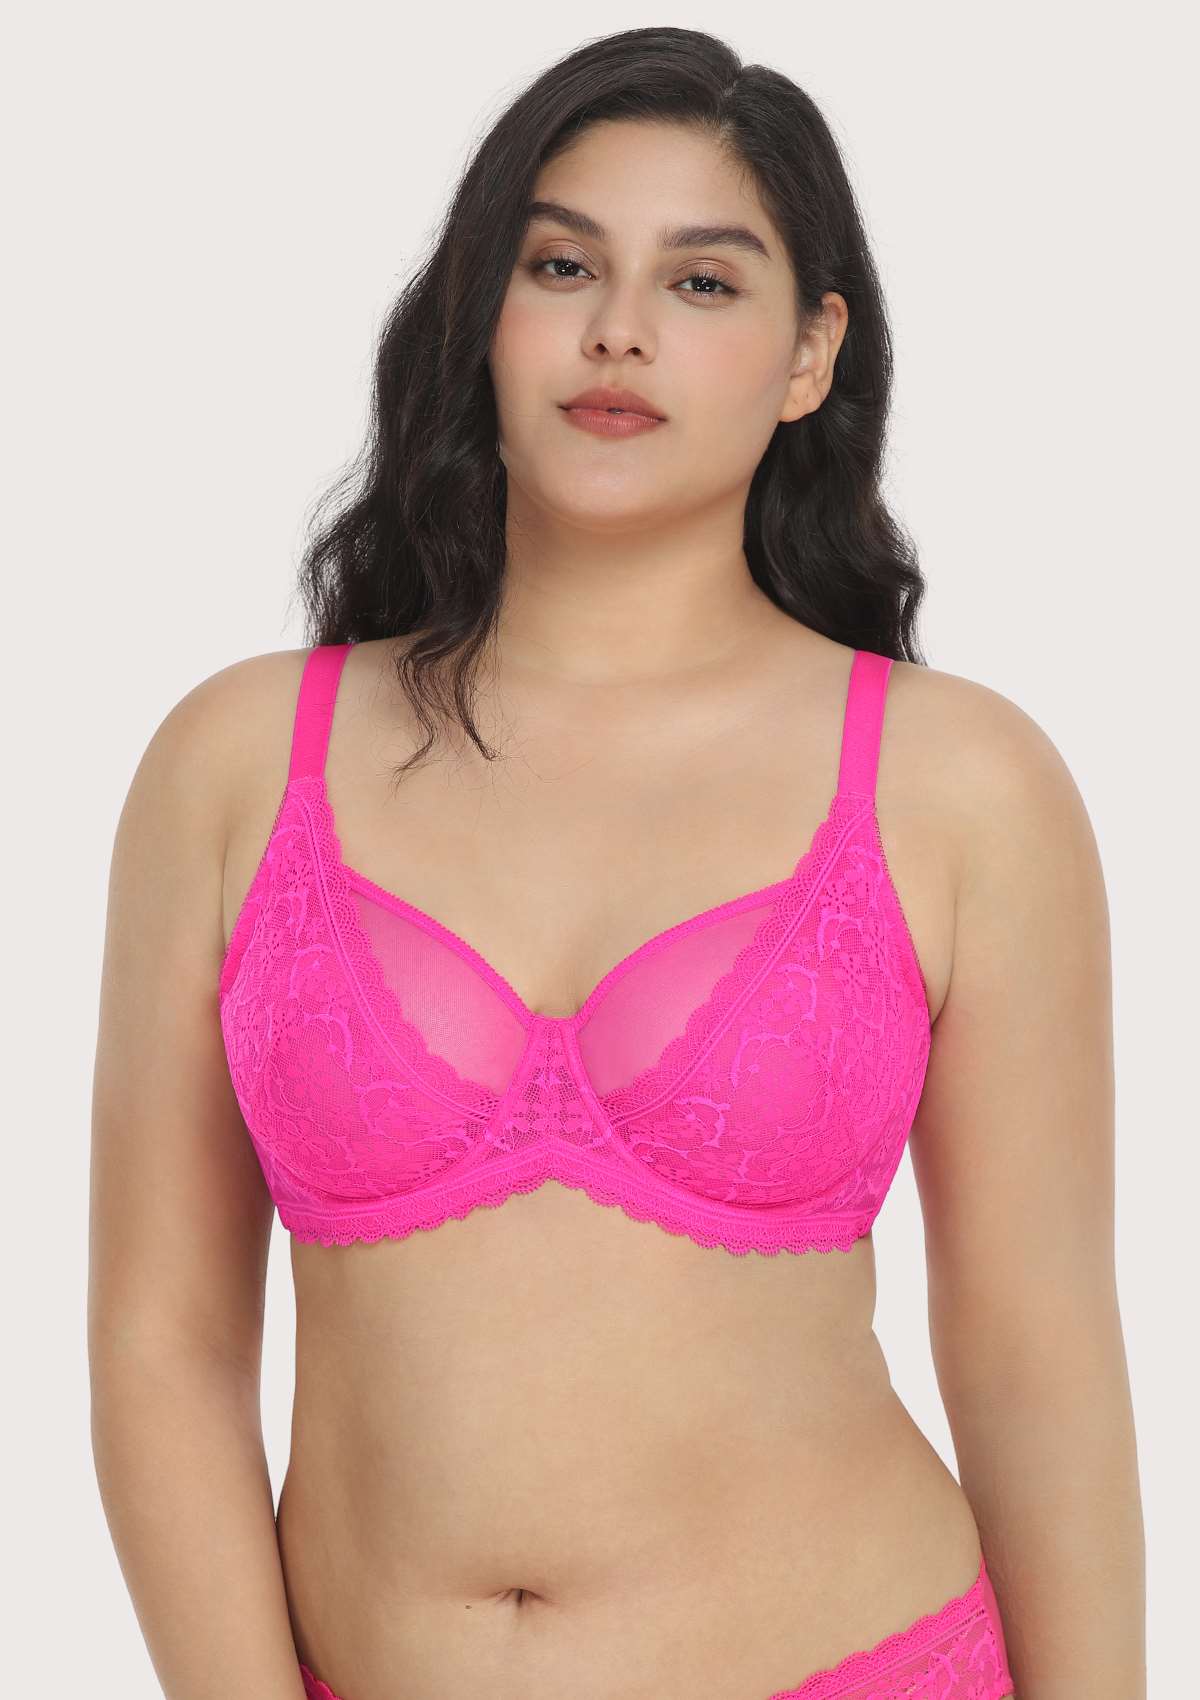 HSIA Anemone Lace Unlined Bra: Supportive, Lightweight Bra - Ginger / 34 / C